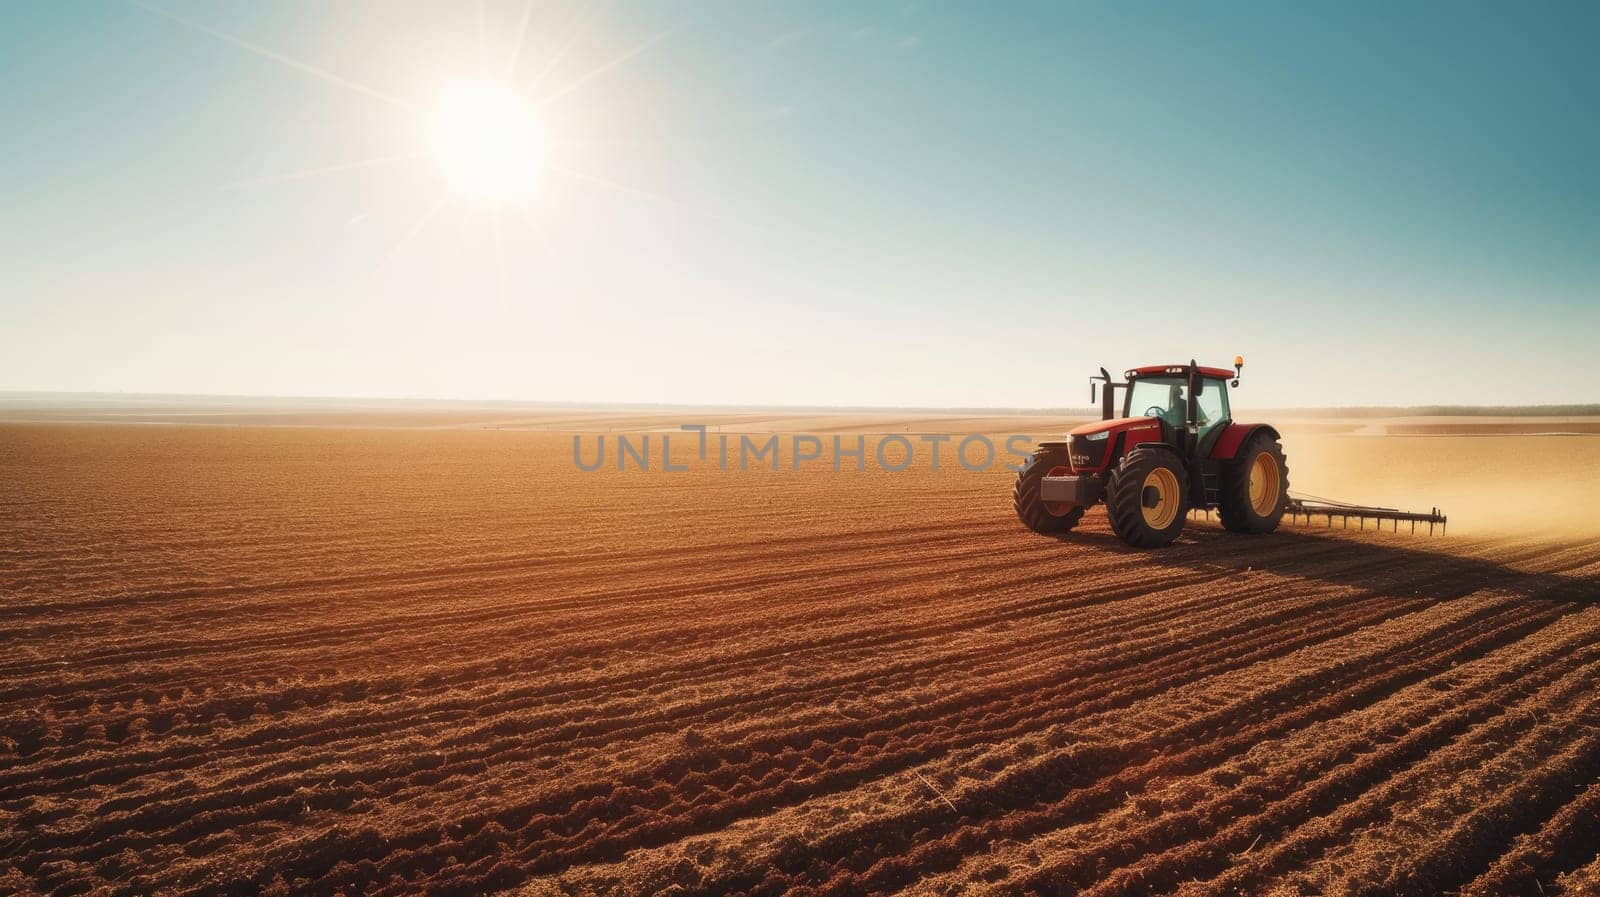 A modern tractor plows through an expansive agricultural field, preparing the soil for a new planting season under a clear sky. AIG41